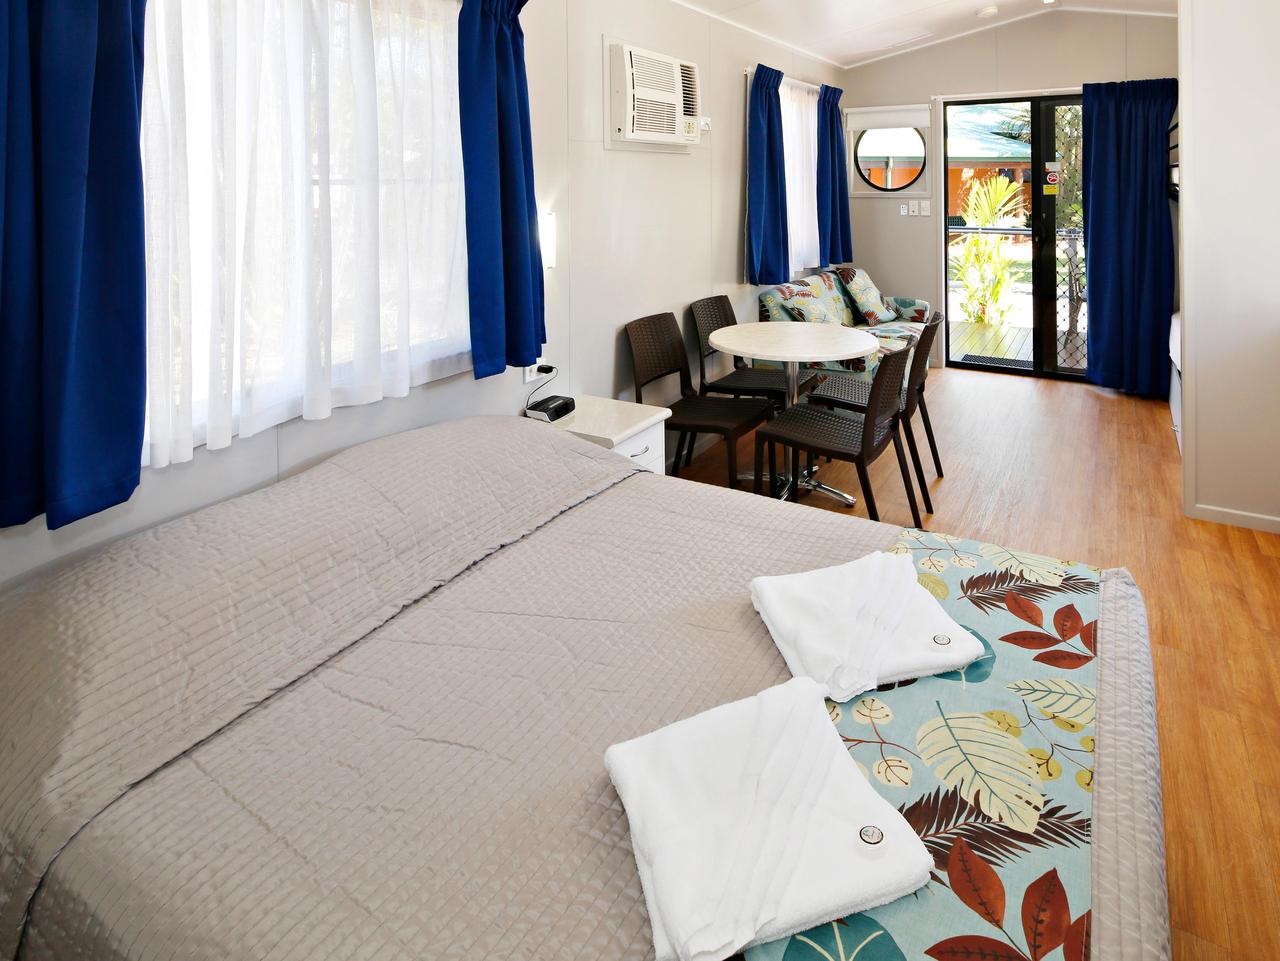 Affordable accommodation for families at Cairns Coconut Holiday Resort.